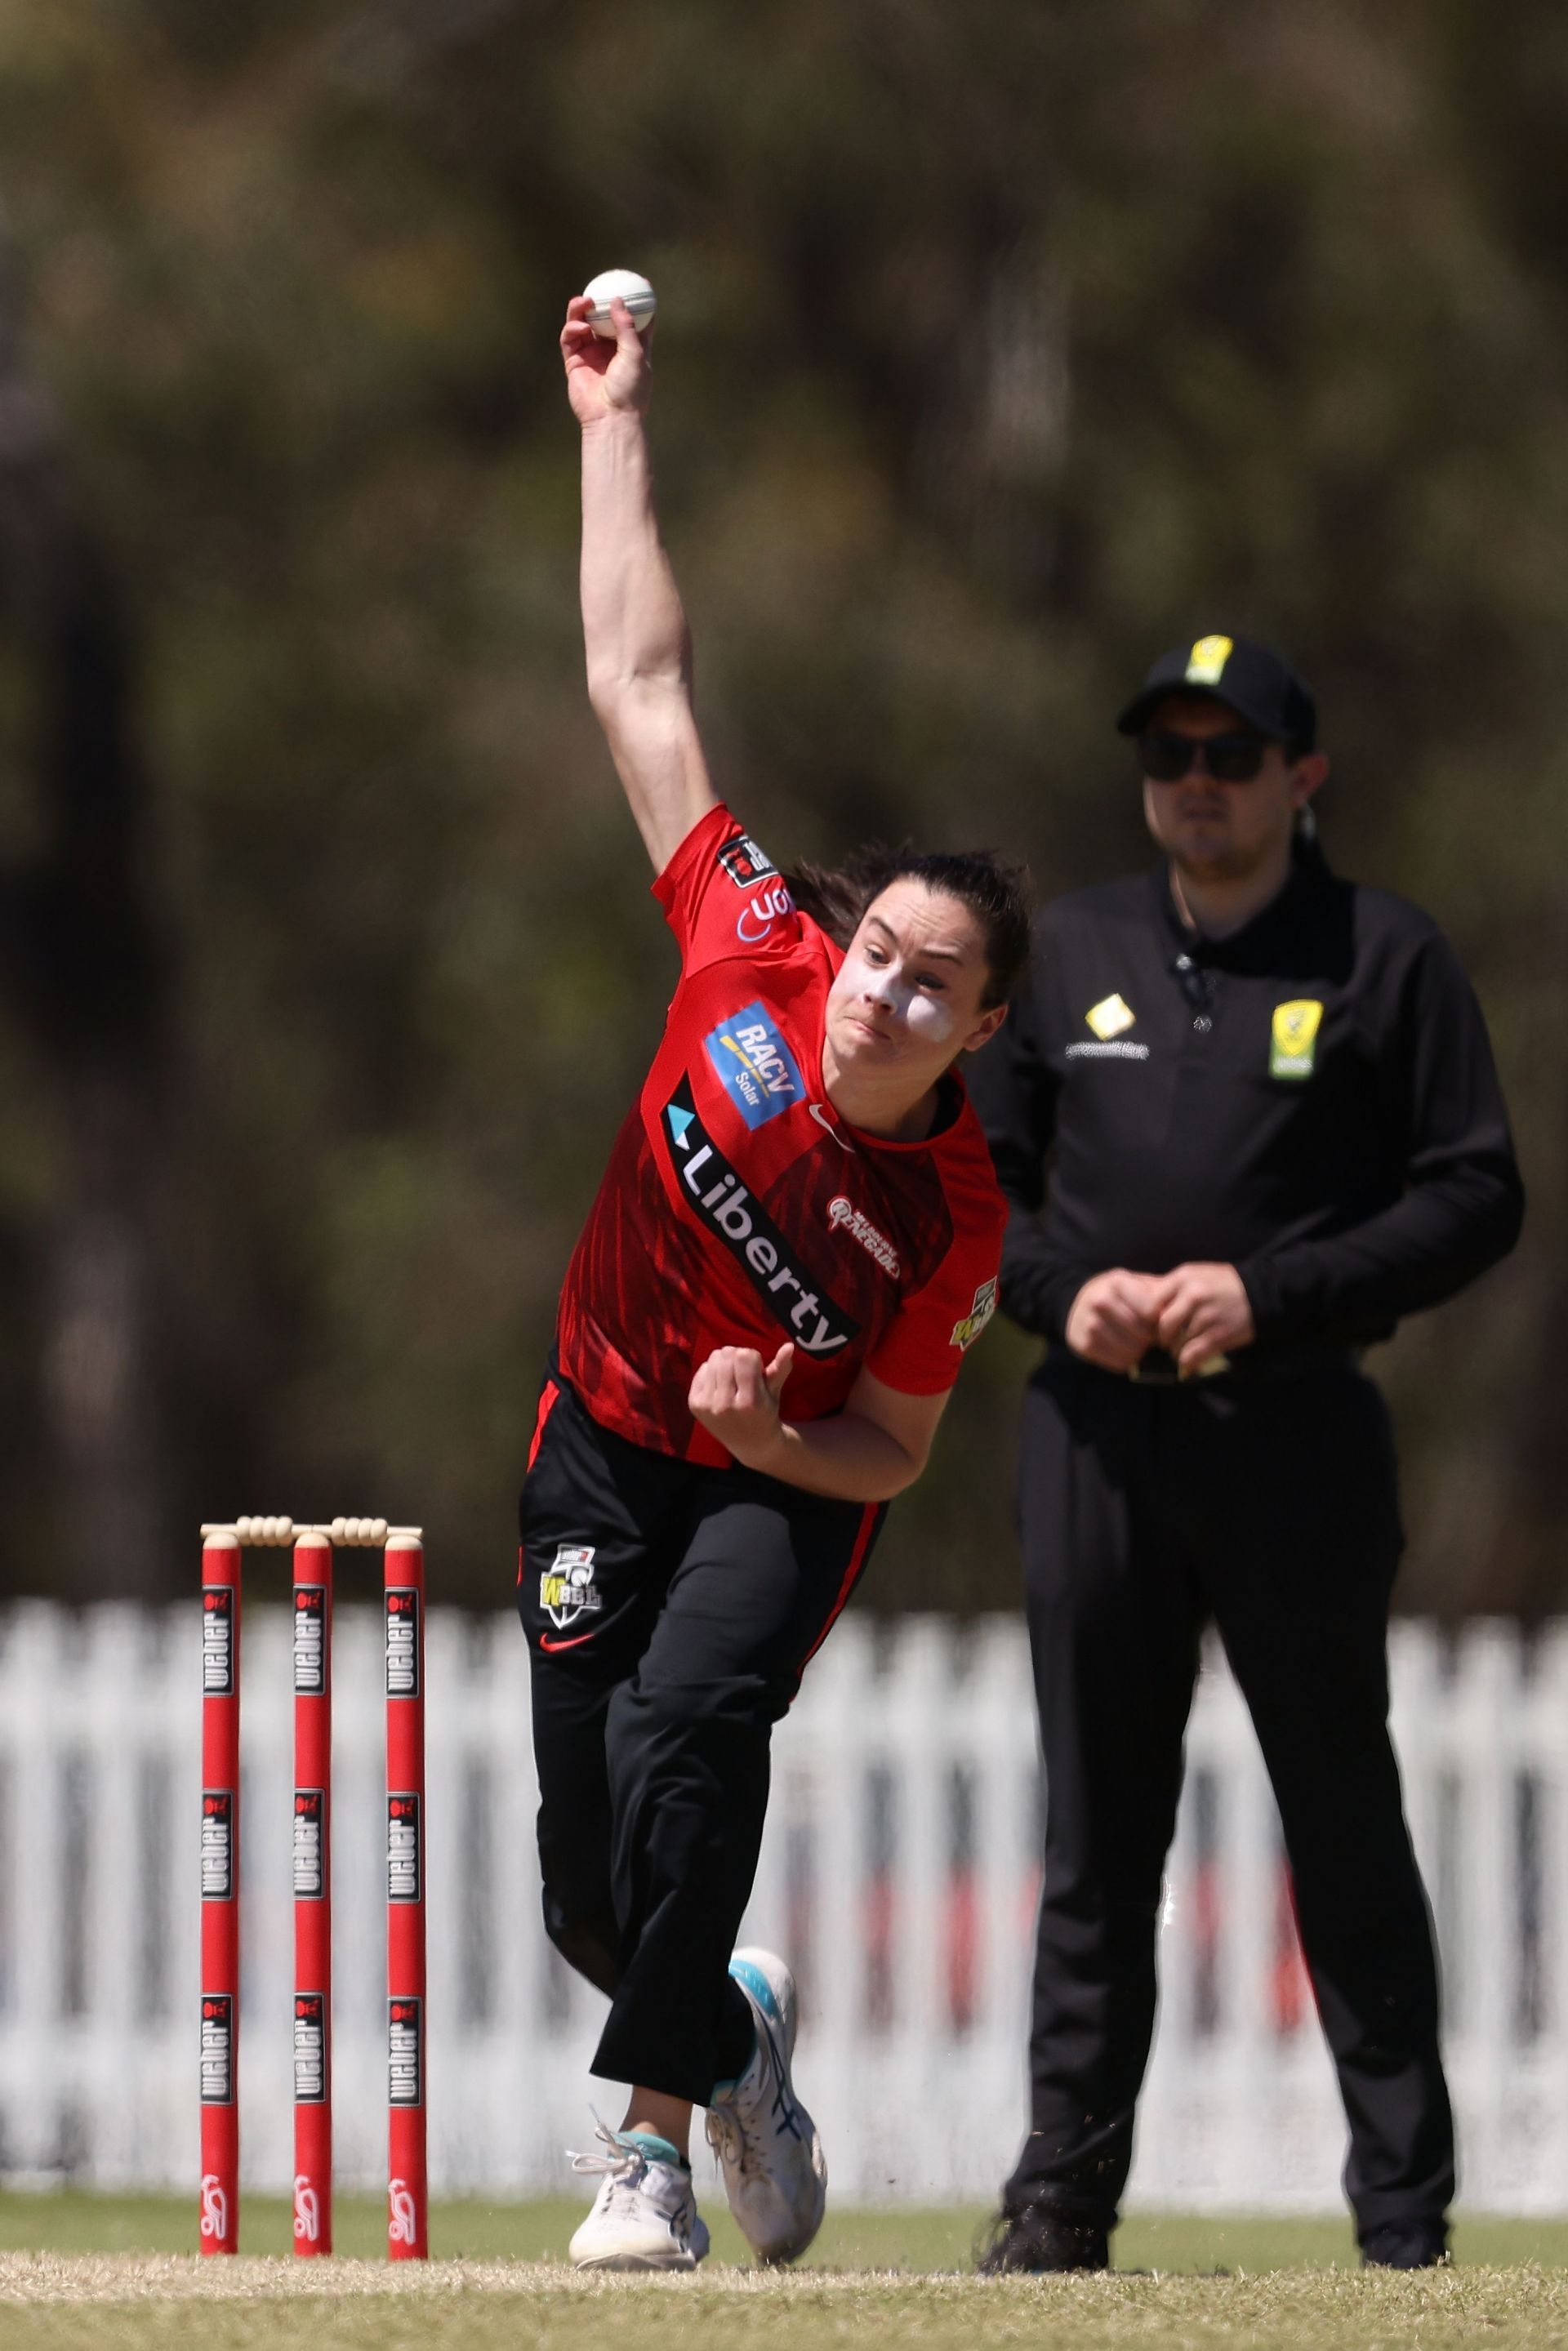 A clutch performance in the highest scoring WBBL match of all-time